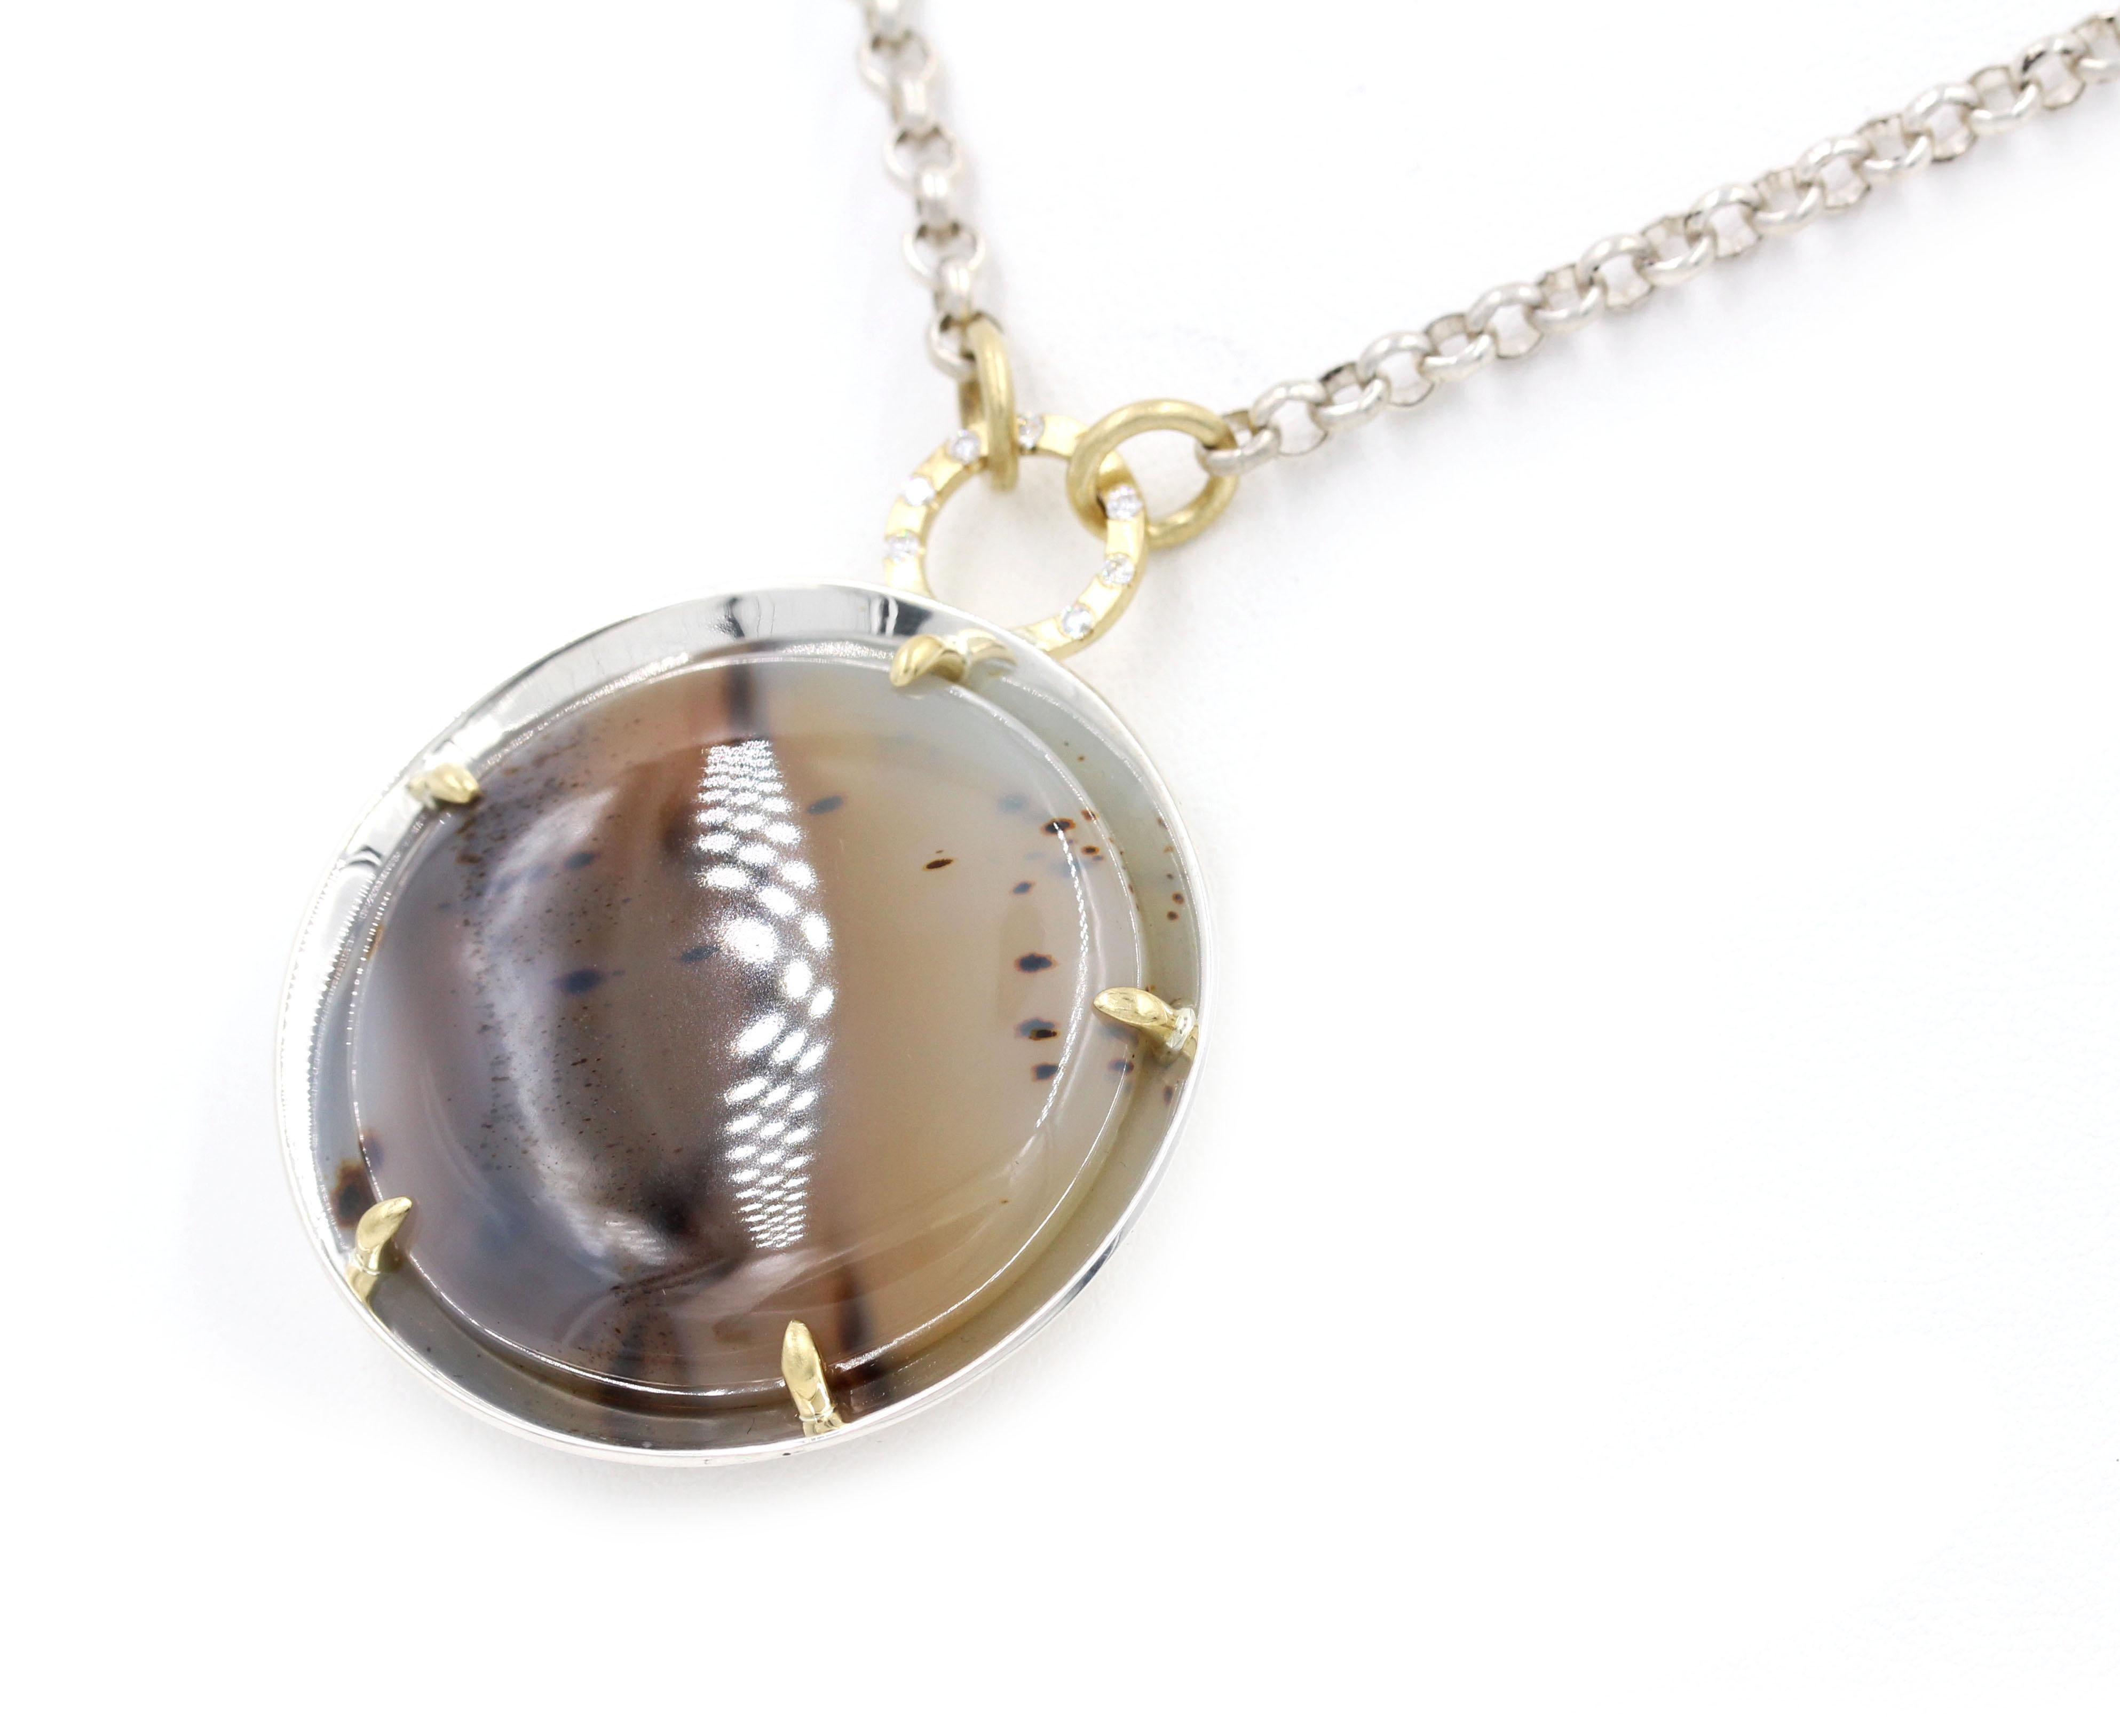 Robin Waynee
Montana Agate Necklace, 2019
Sterling Silver & 18K Gold, Montana Agate, VS1 Diamonds.

Robin has an unprecedented record at the Saul Bell Design Awards, one of the most prestigious international jewelry competitions. She earned First